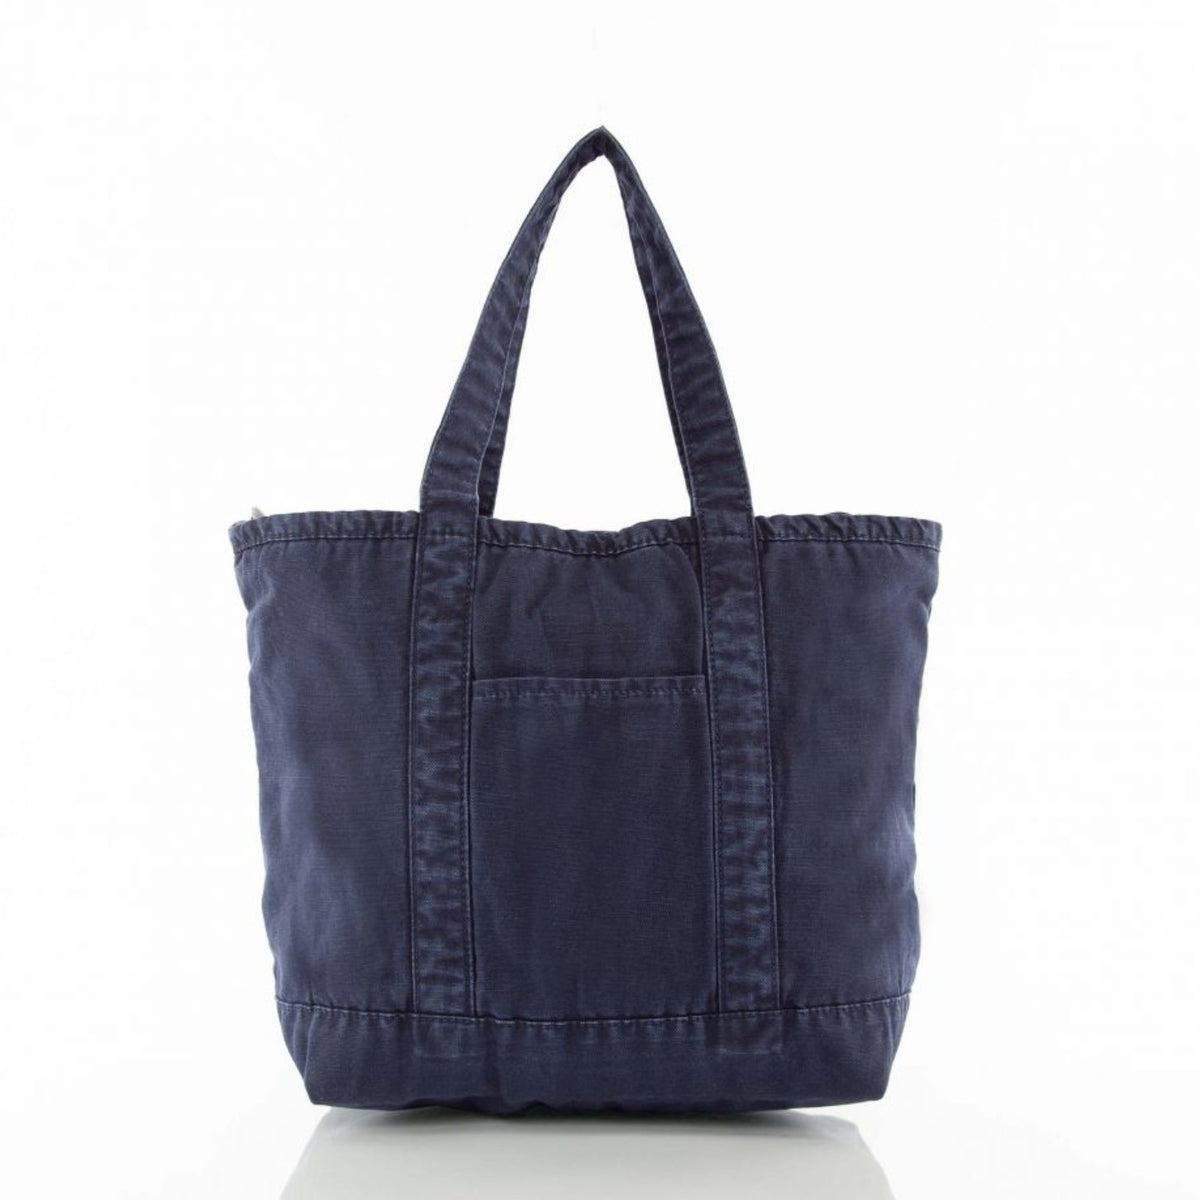 Totes & Beach Bags Solid Color Boat Tote